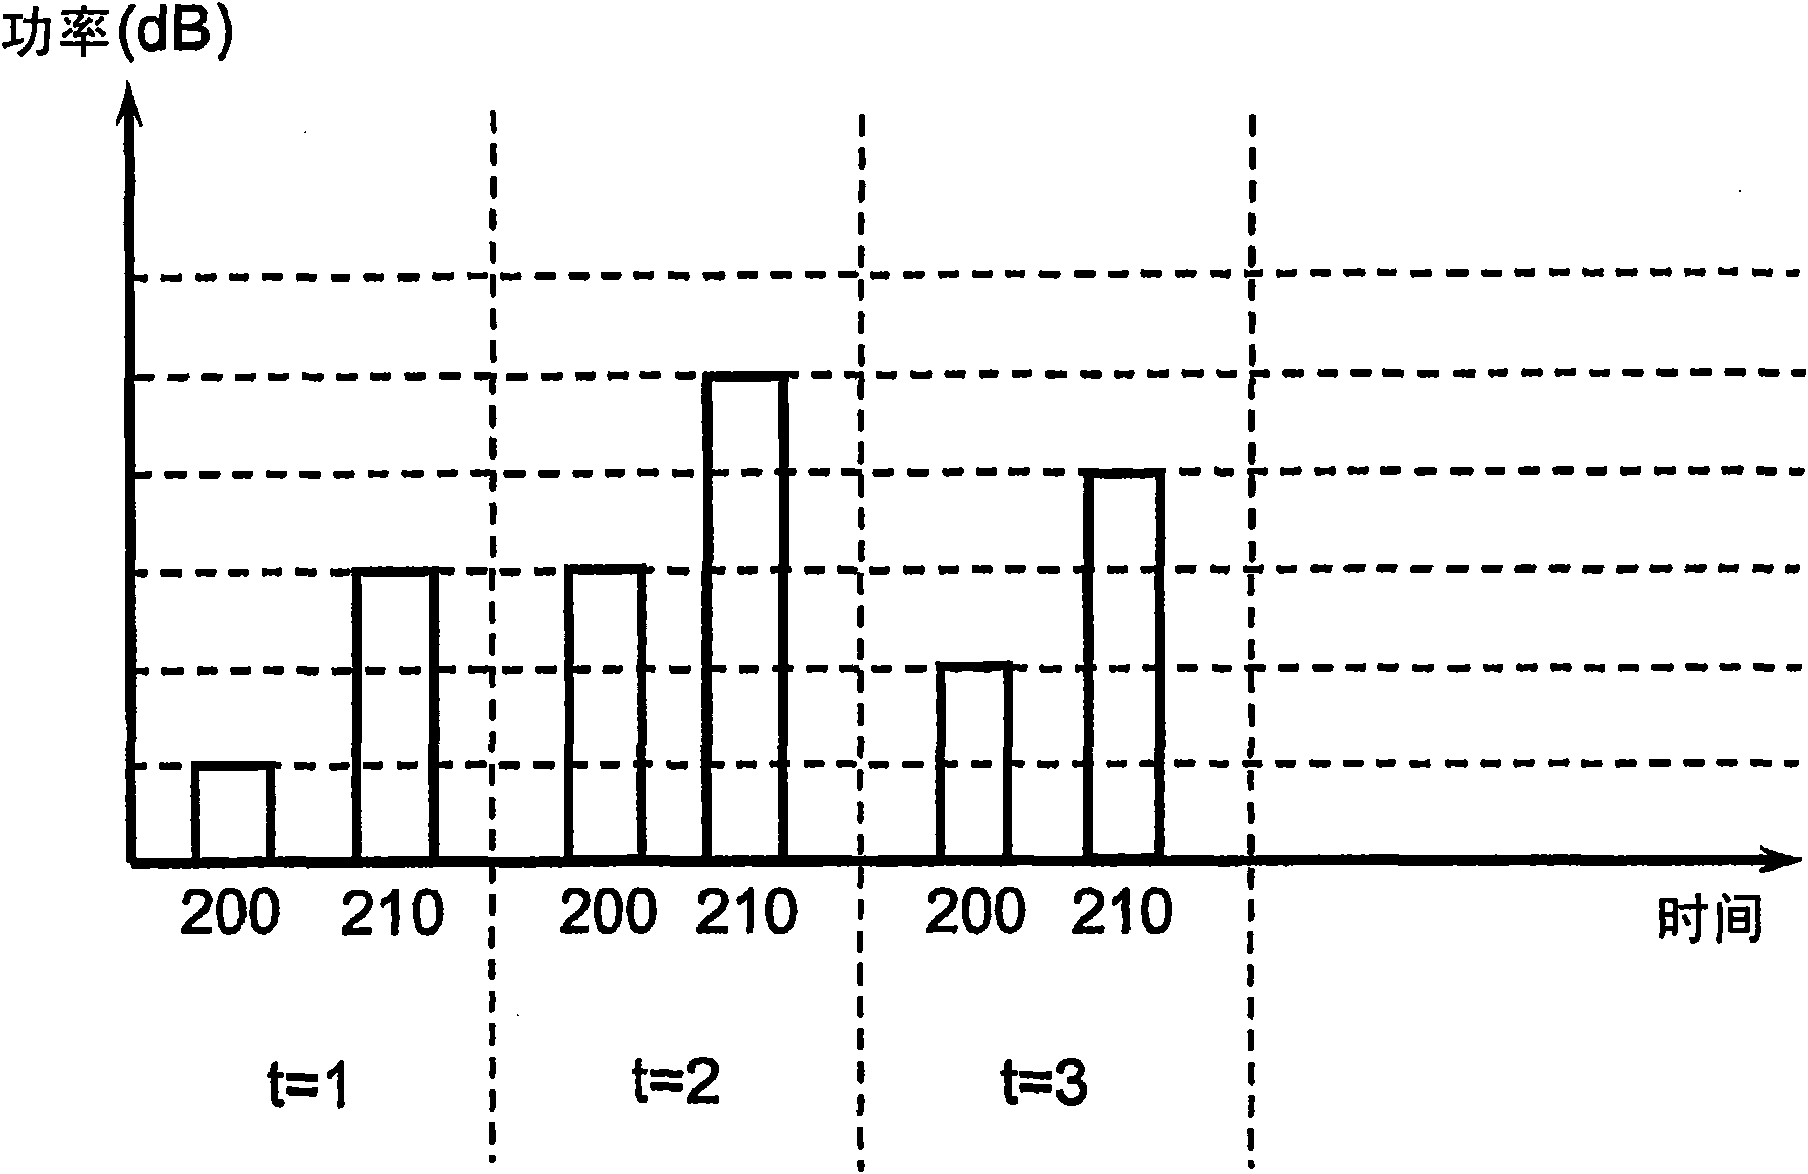 Method for selecting reference E-TFCI based on requested service